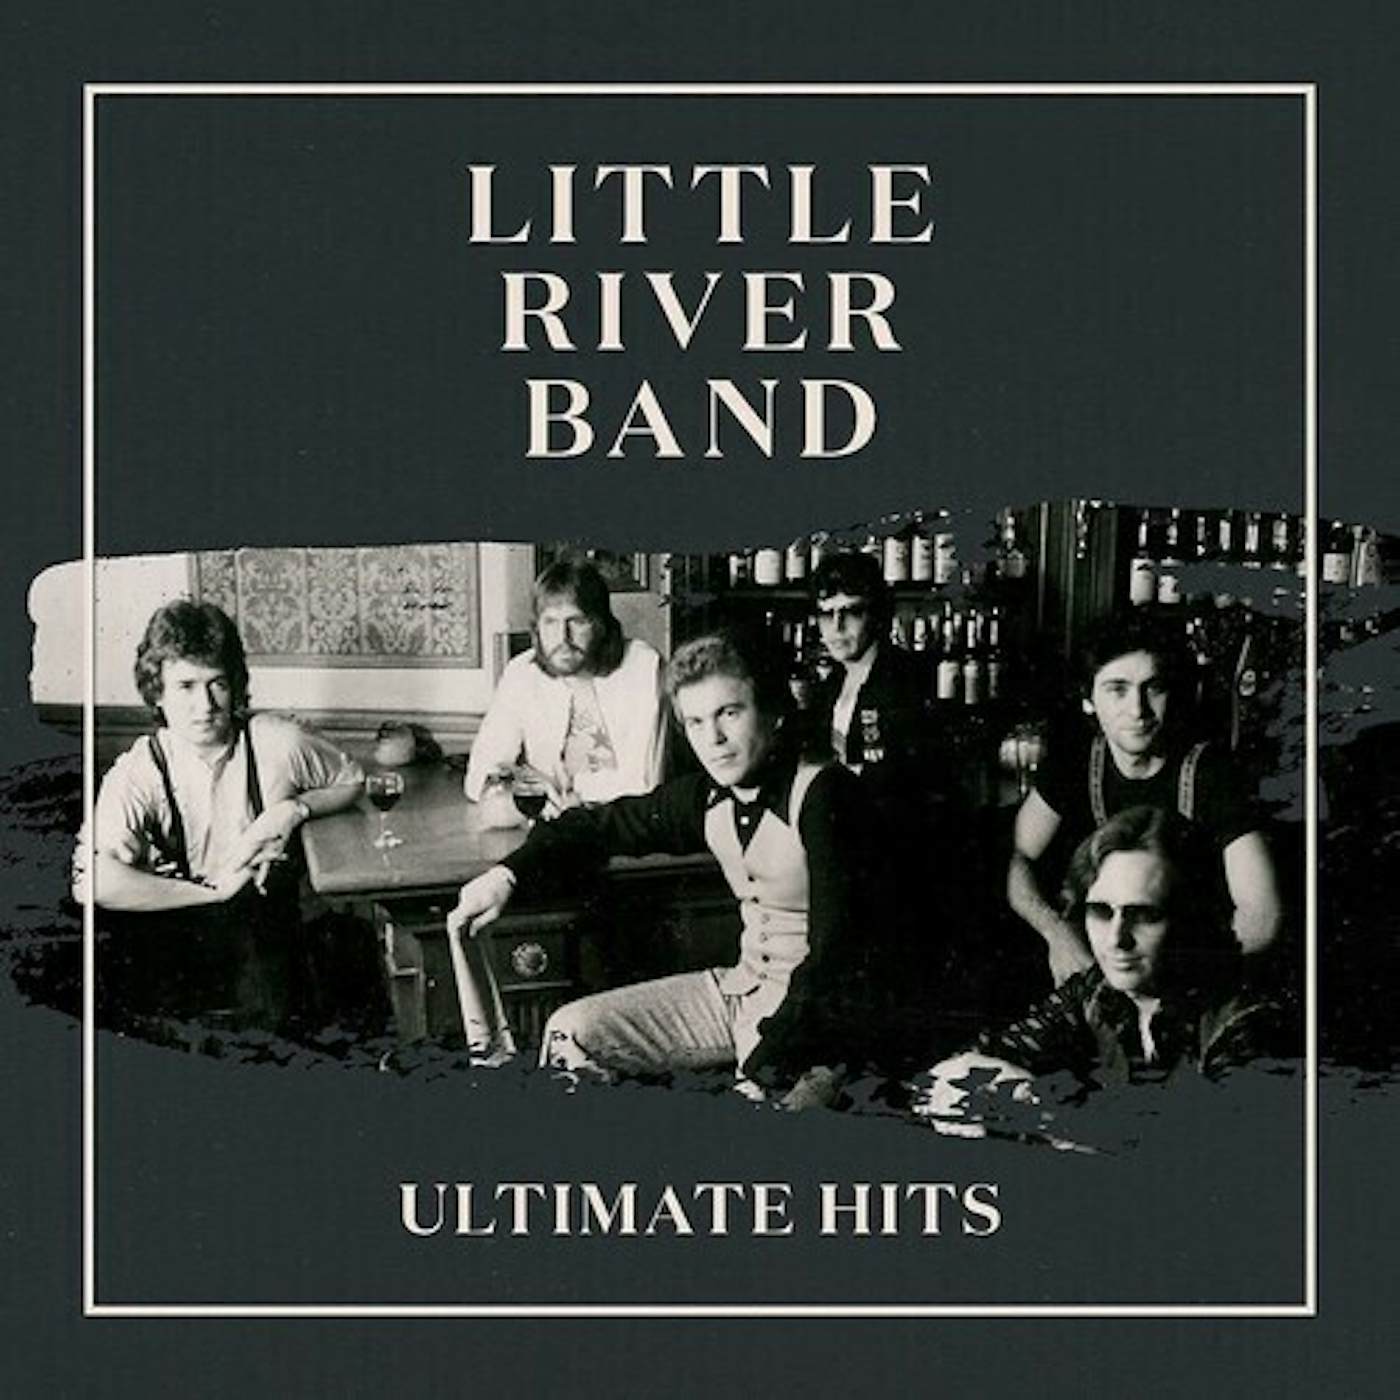 Little River Band ULTIMATE HITS CD